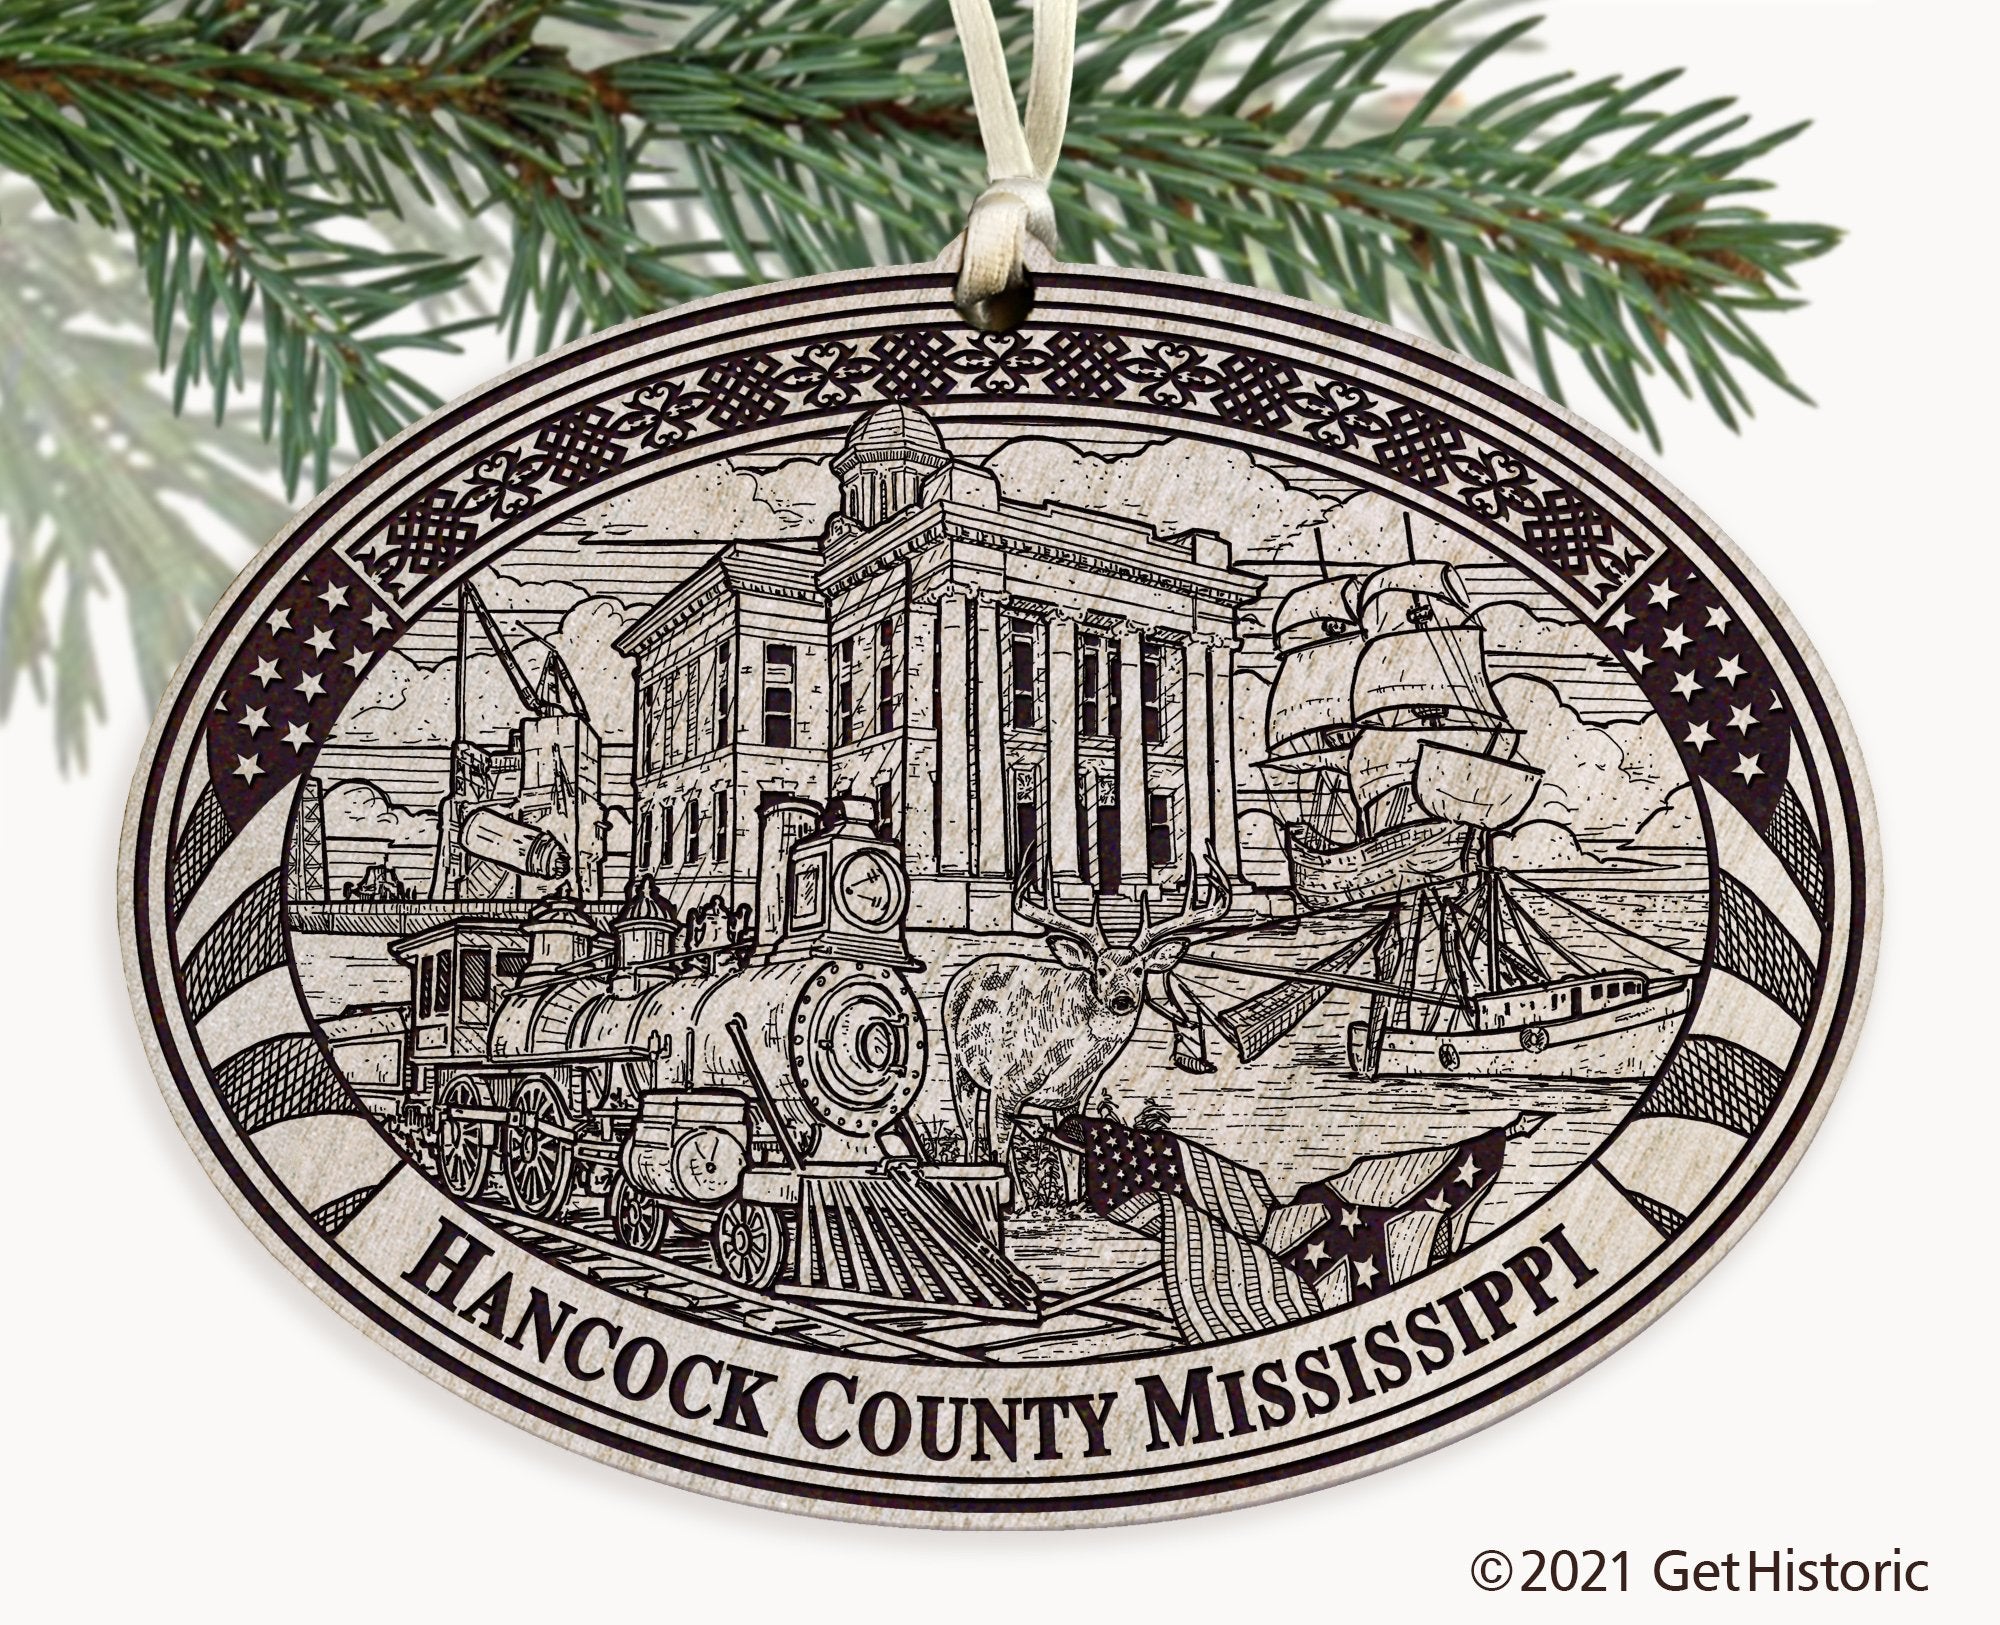 Hancock County Mississippi Engraved Ornament